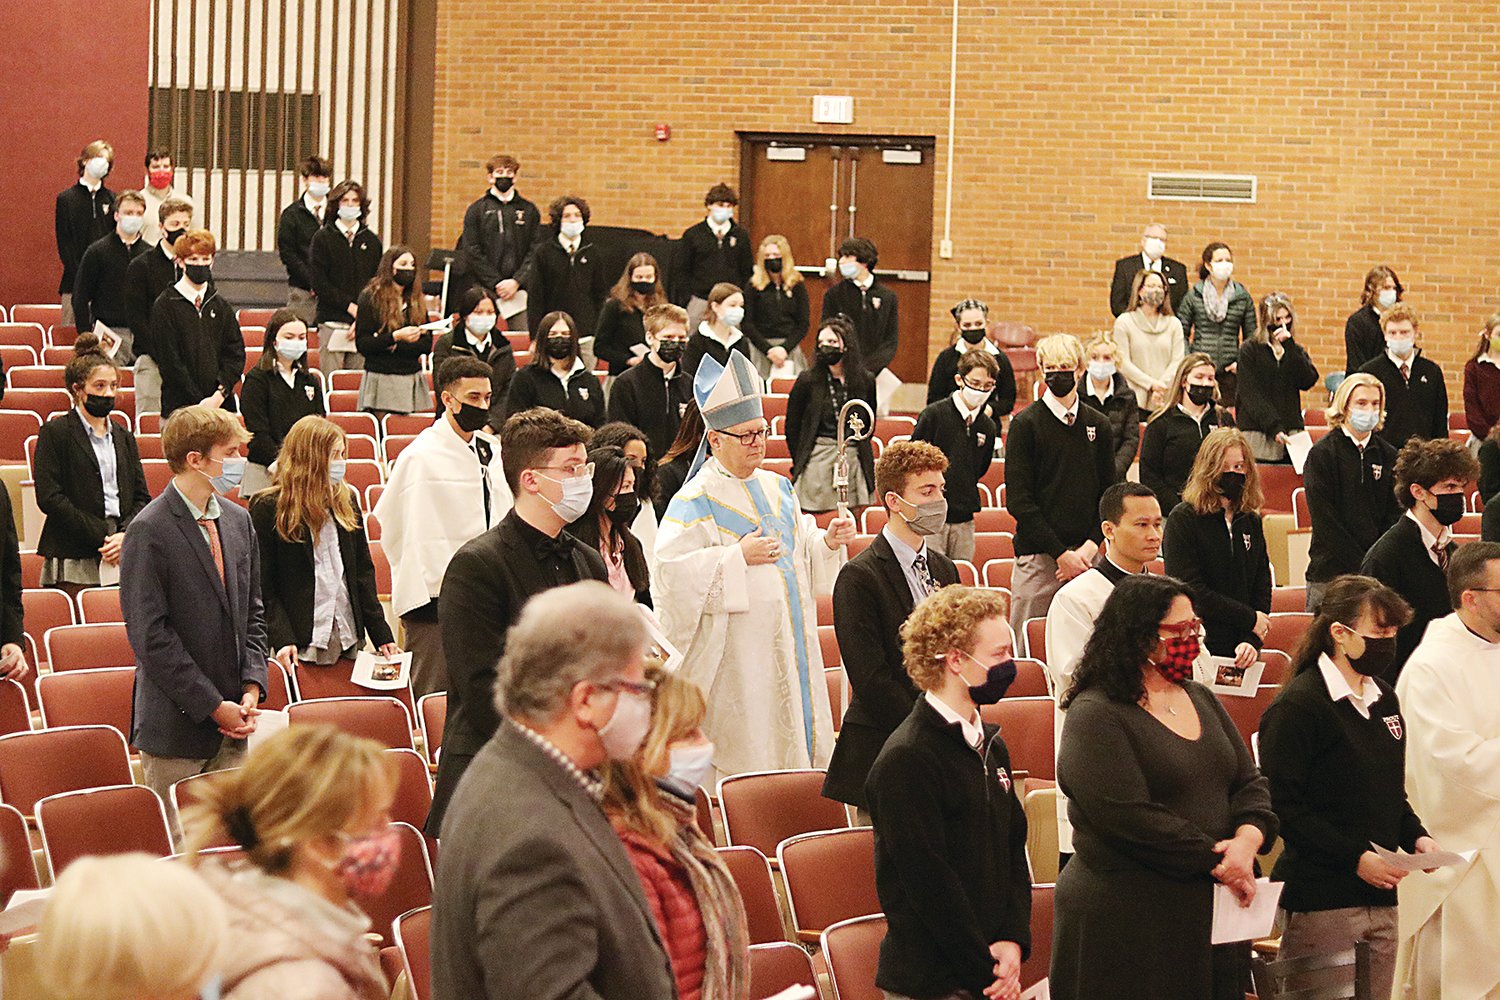 Bishop Thomas J. Tobin processes into a socially distanced Prout School auditorium to celebrate Mass on the Feast of the Immaculate Conception.